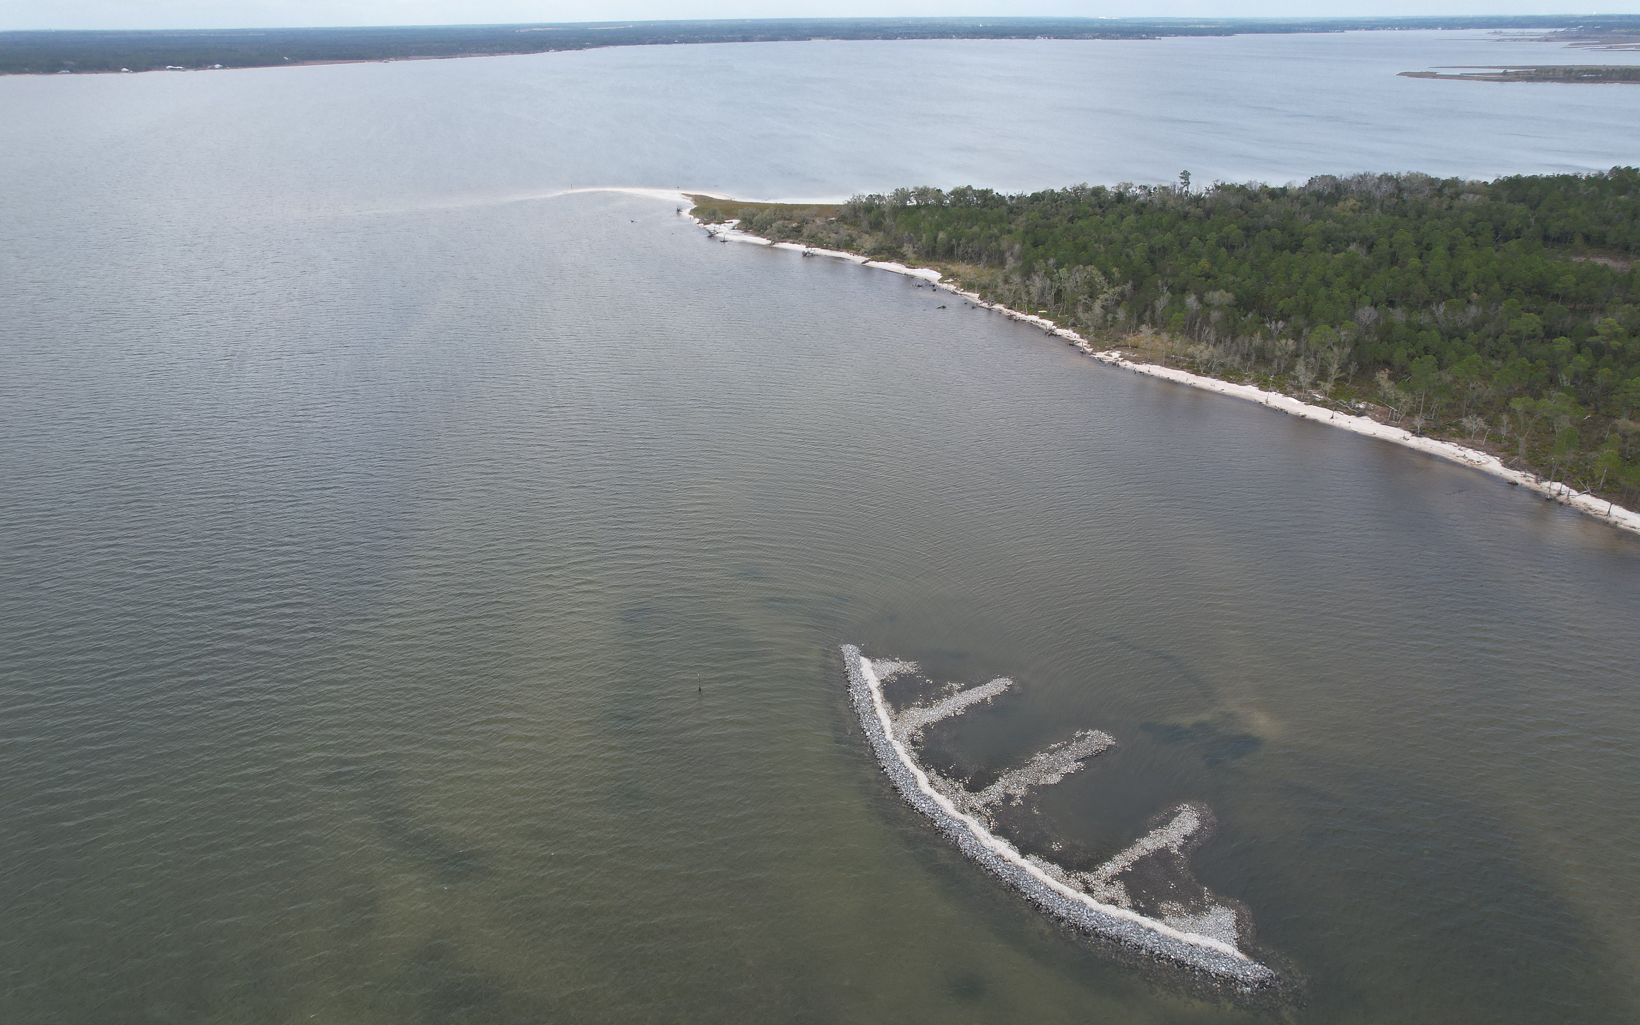 Aerial view of Escribano point, which separates East and Blackwater Bays.